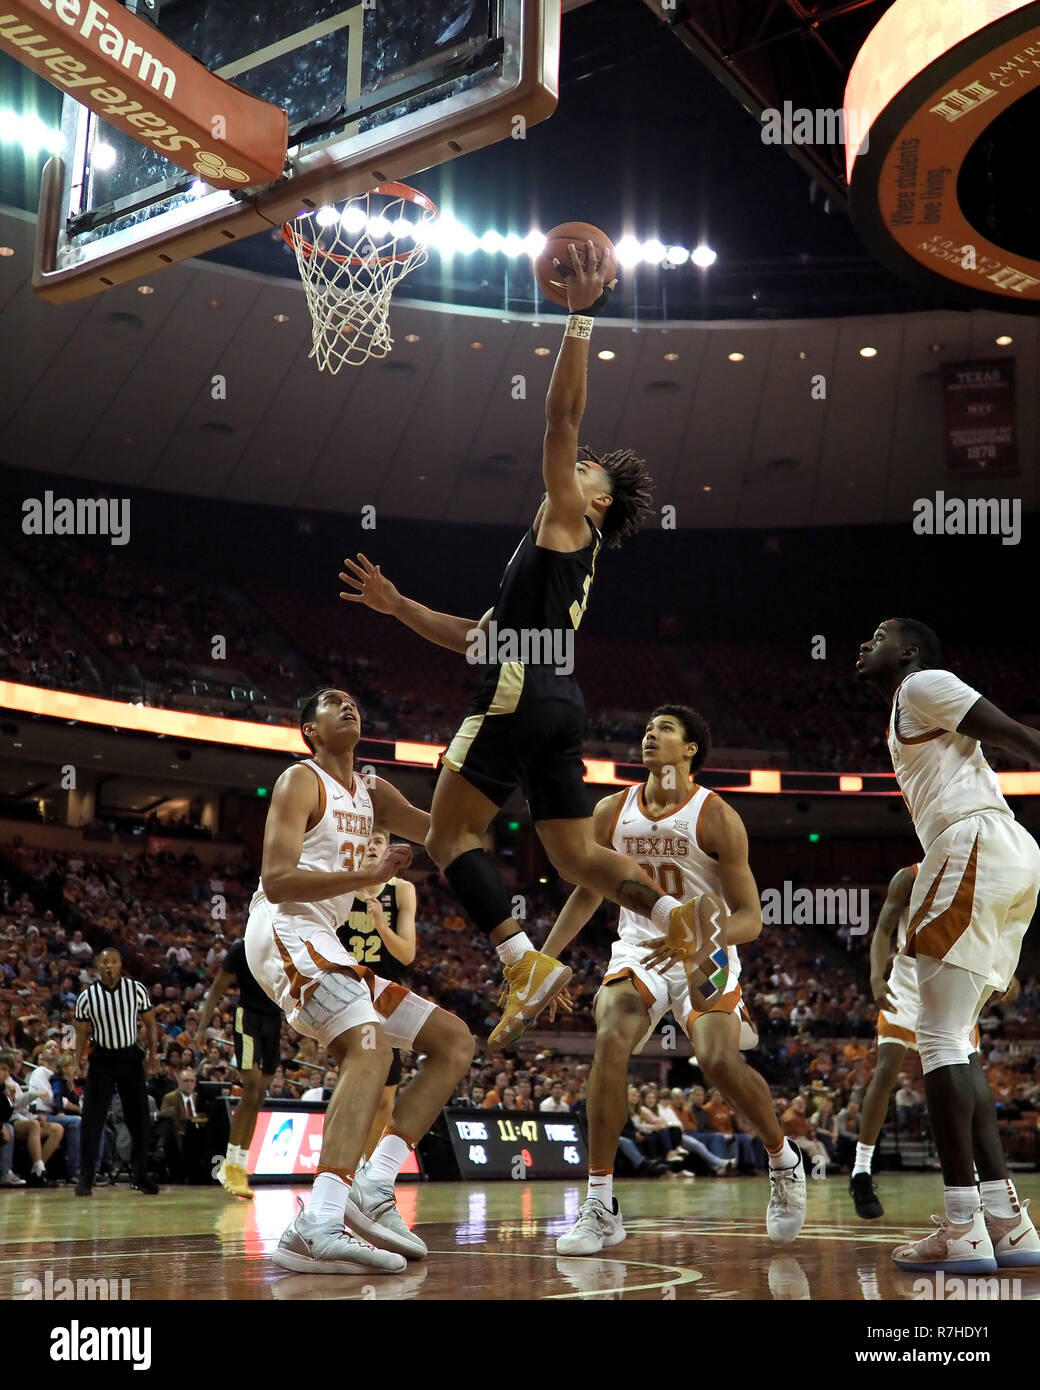 Austin, Texas, USA. 9th Dec 2018. Carsen Edwards #3 of the Purdue Boilermakers in action vs the Texas Longhorns at the Frank Erwin Center in Austin Texas. Texas defeats Purdue 72-68.Robert Backman/Cal Sport Media. Credit: Cal Sport Media/Alamy Live News Stock Photo